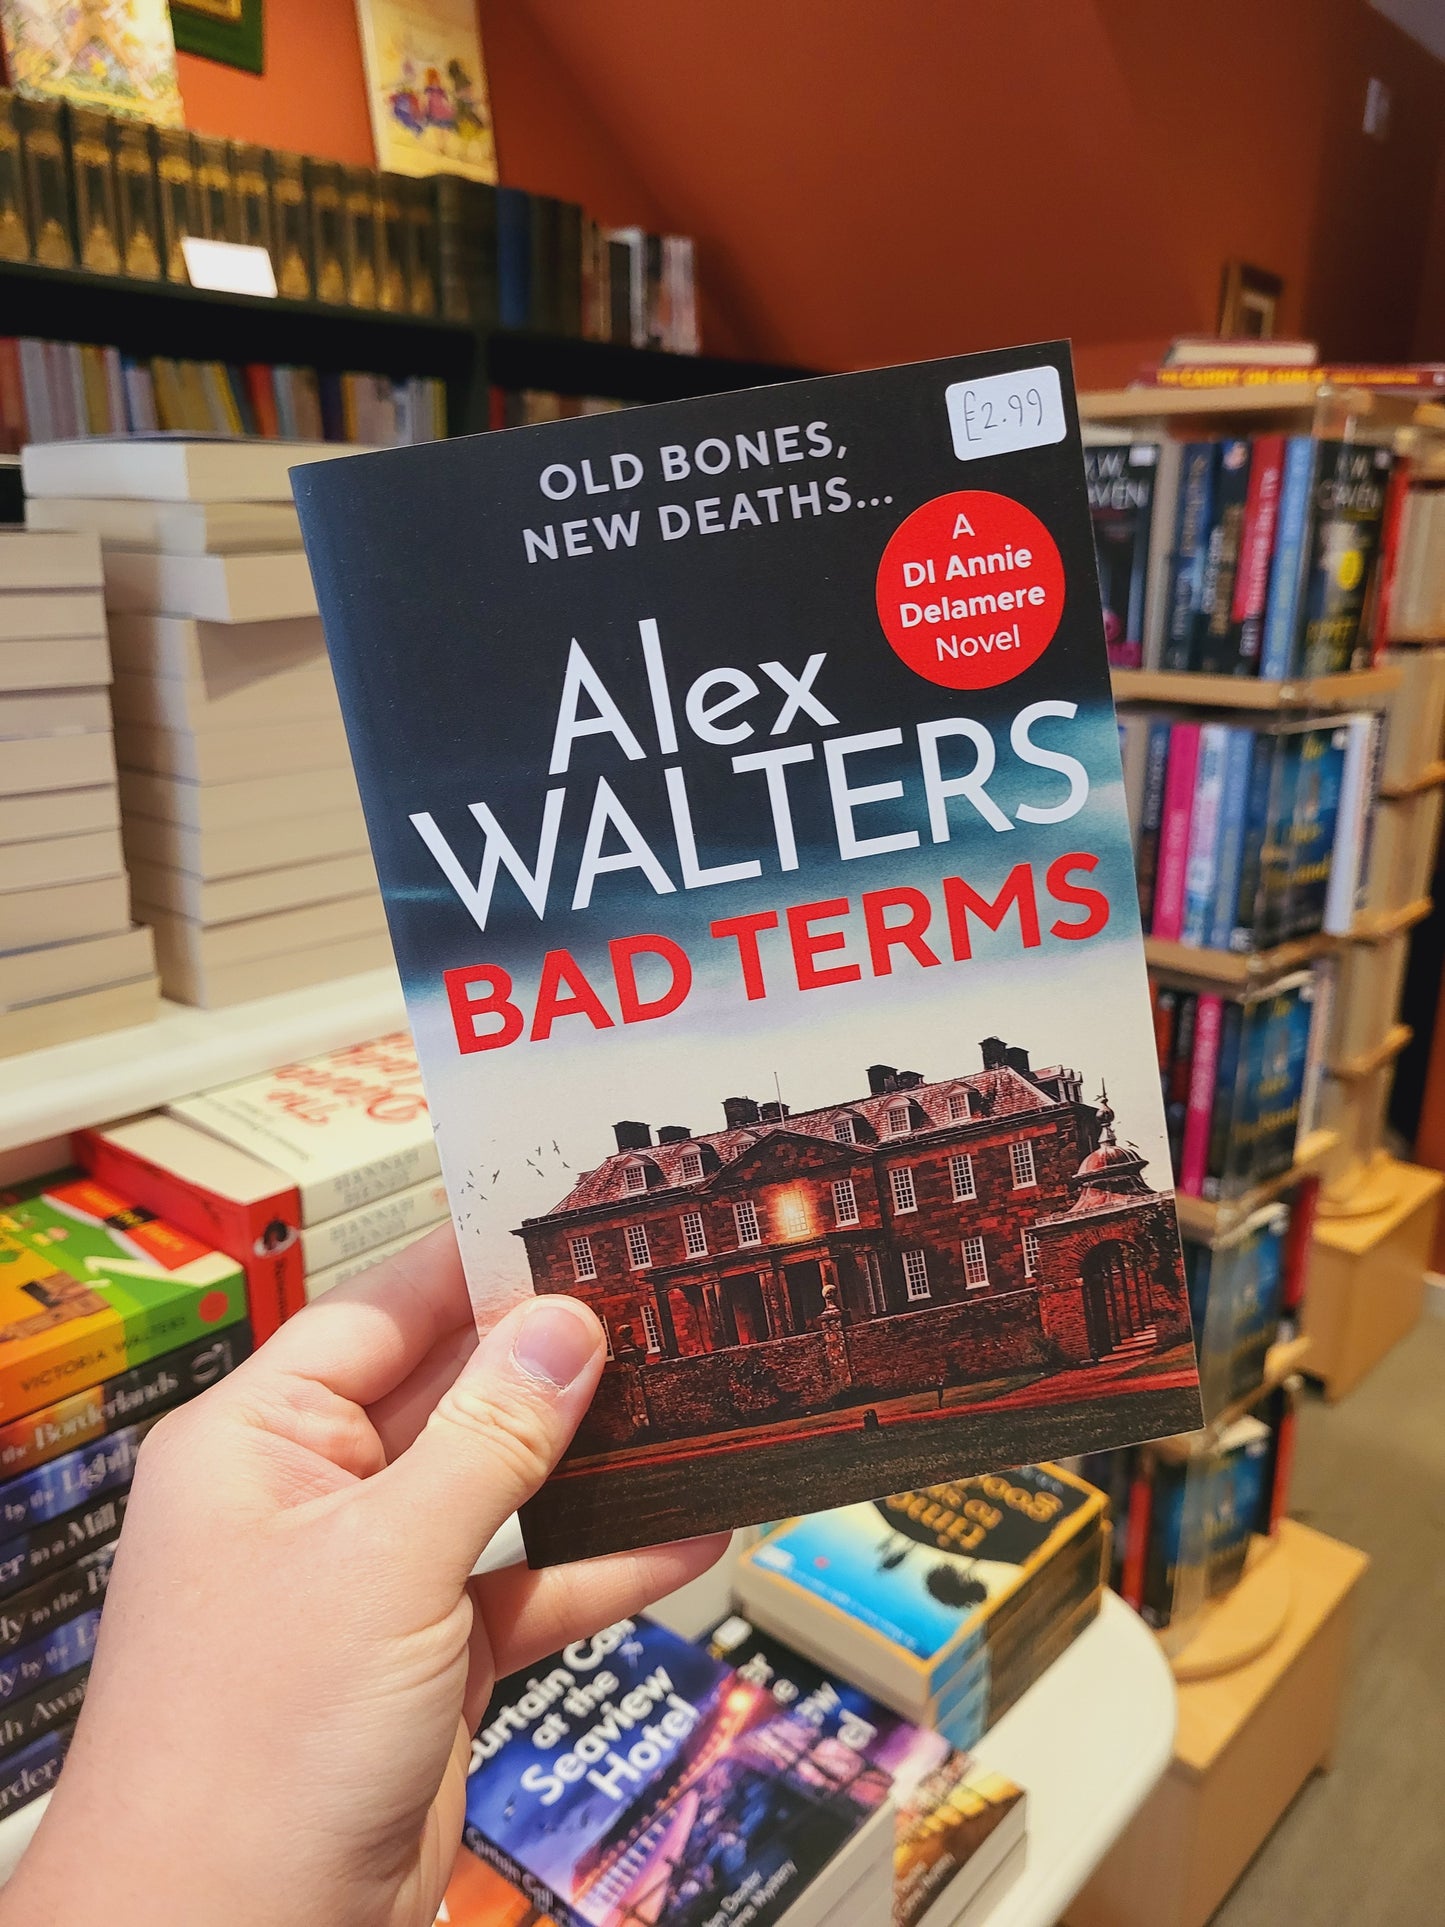 Bad Terms - Alex Walters